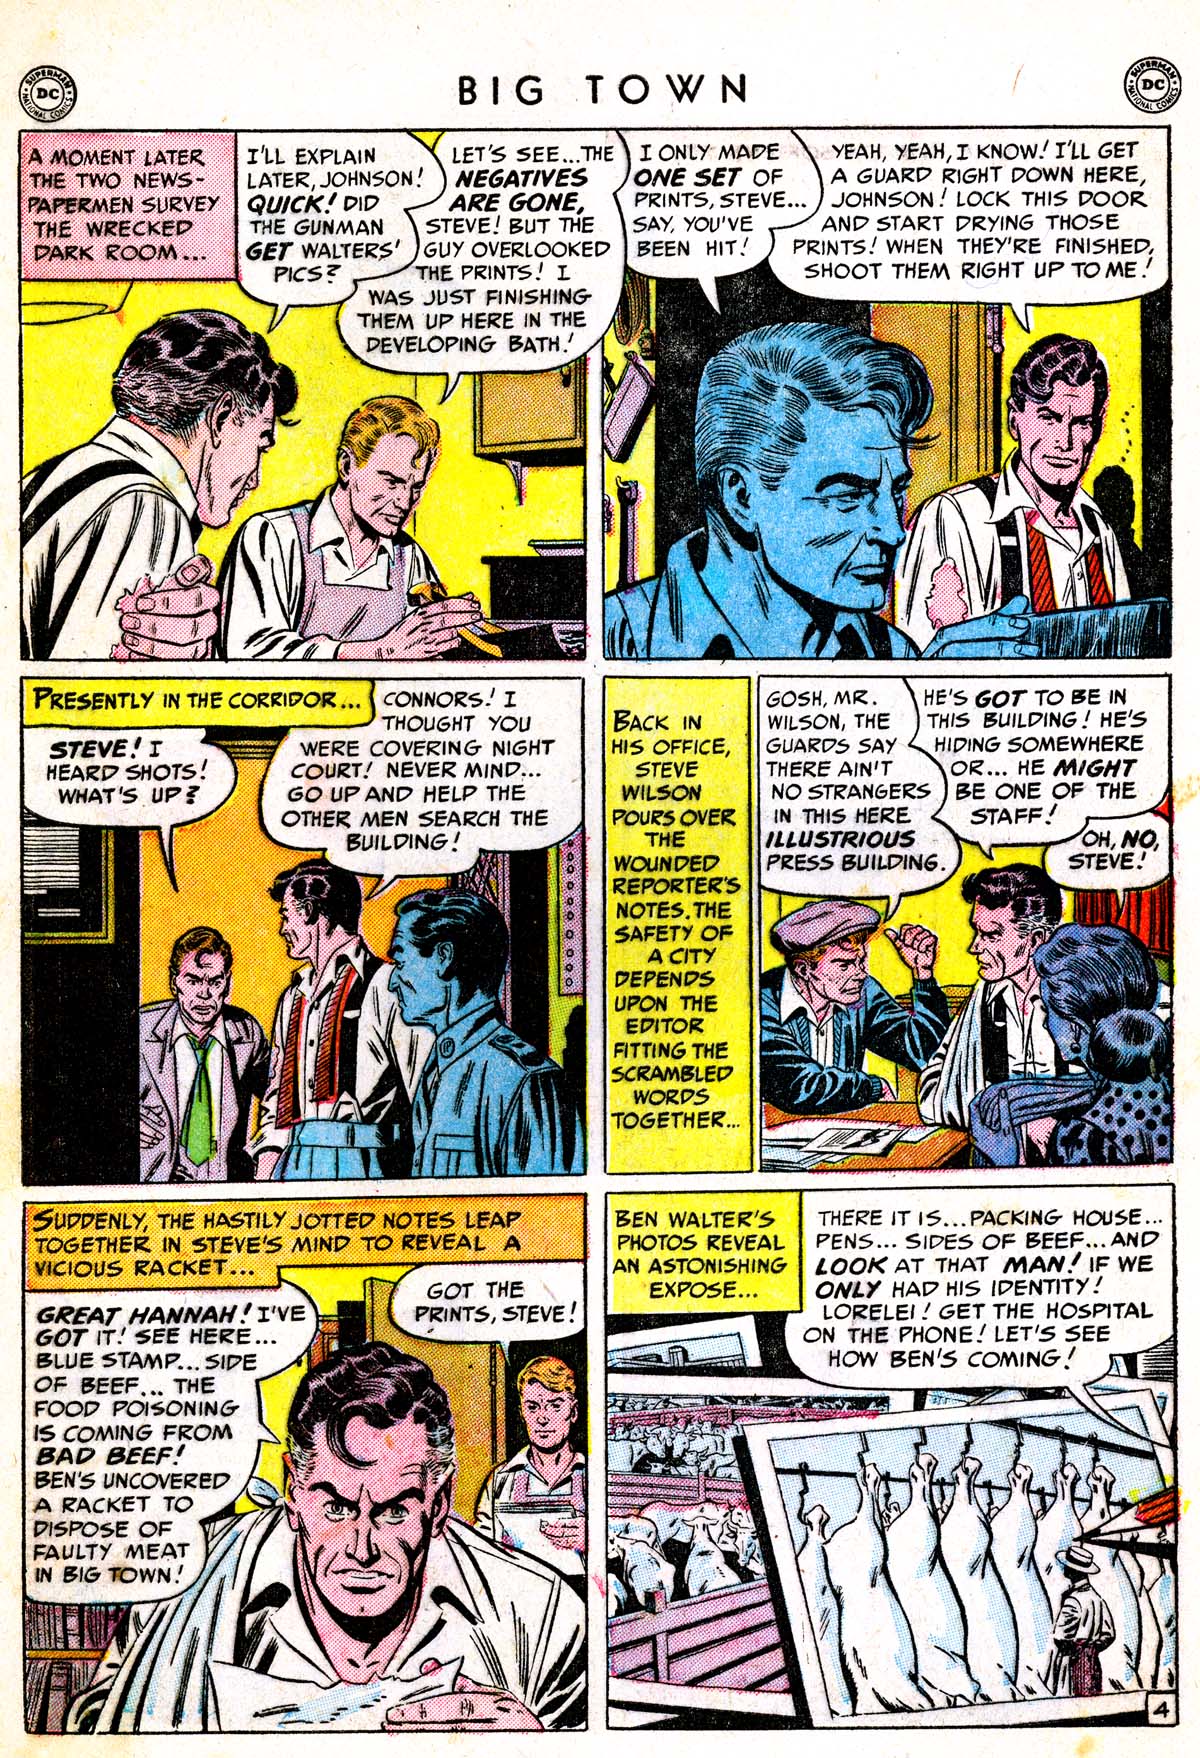 Big Town (1951) 1 Page 5